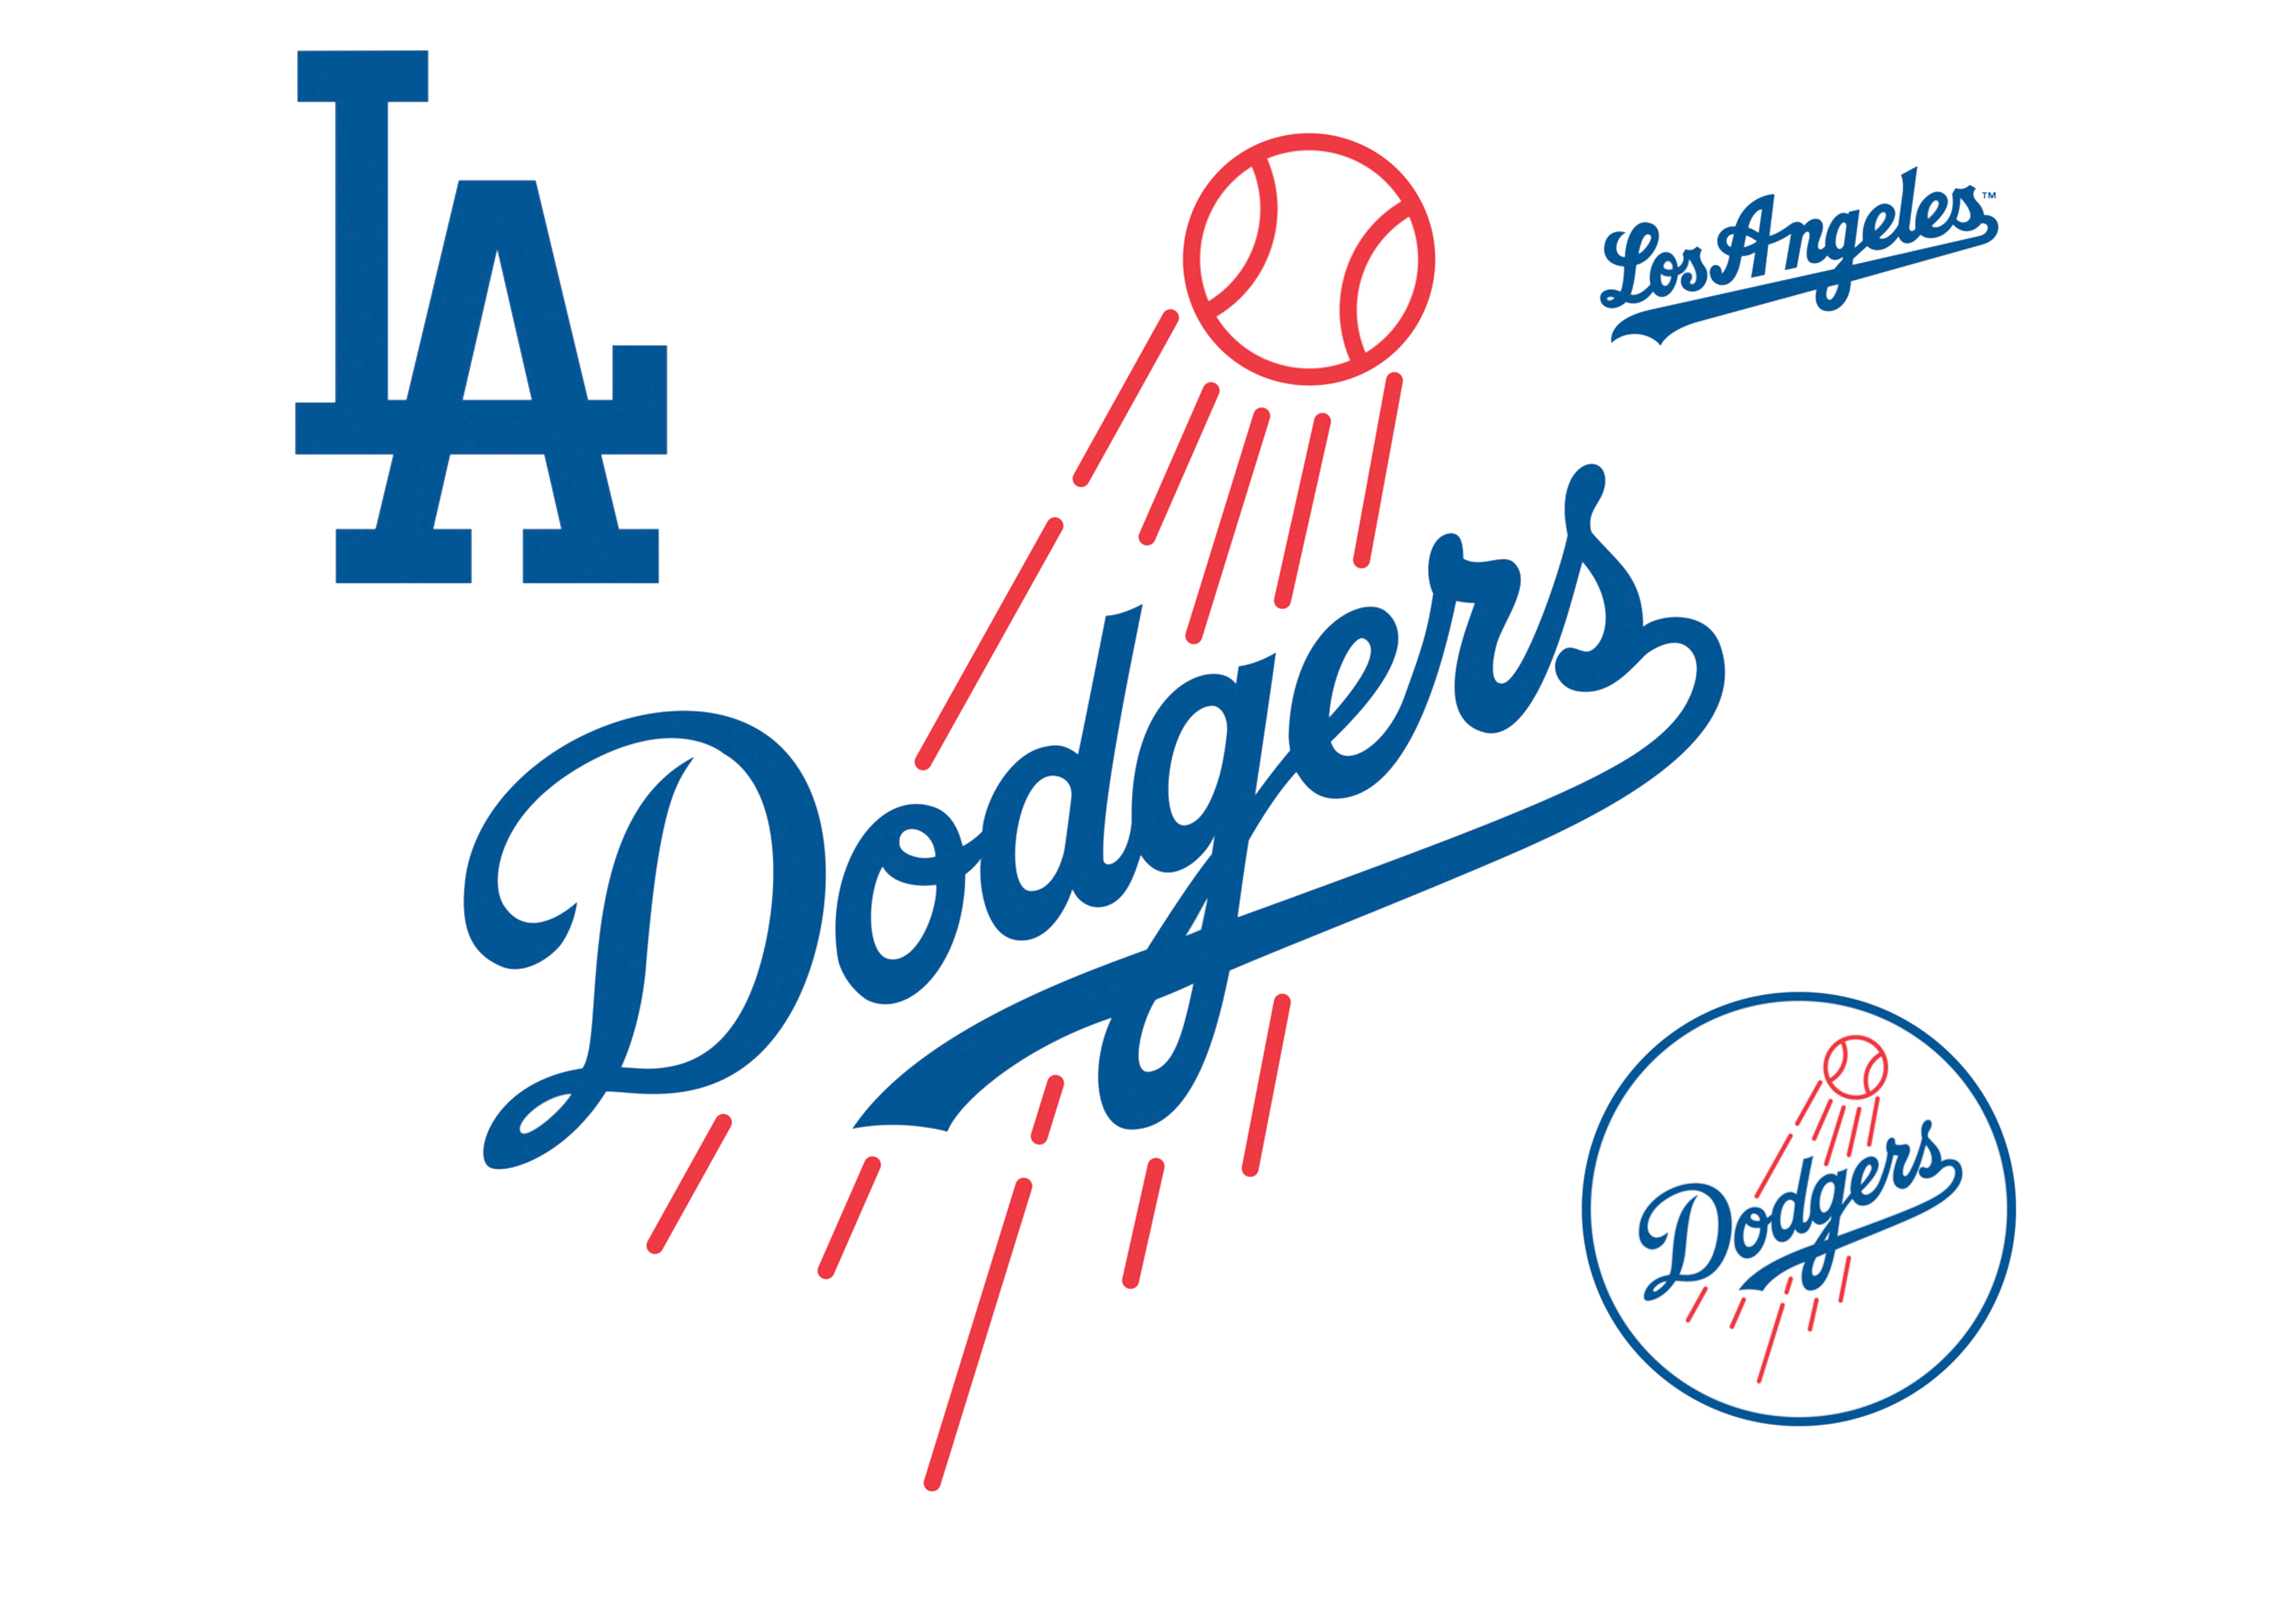 All Dodgers Logos PNG Image